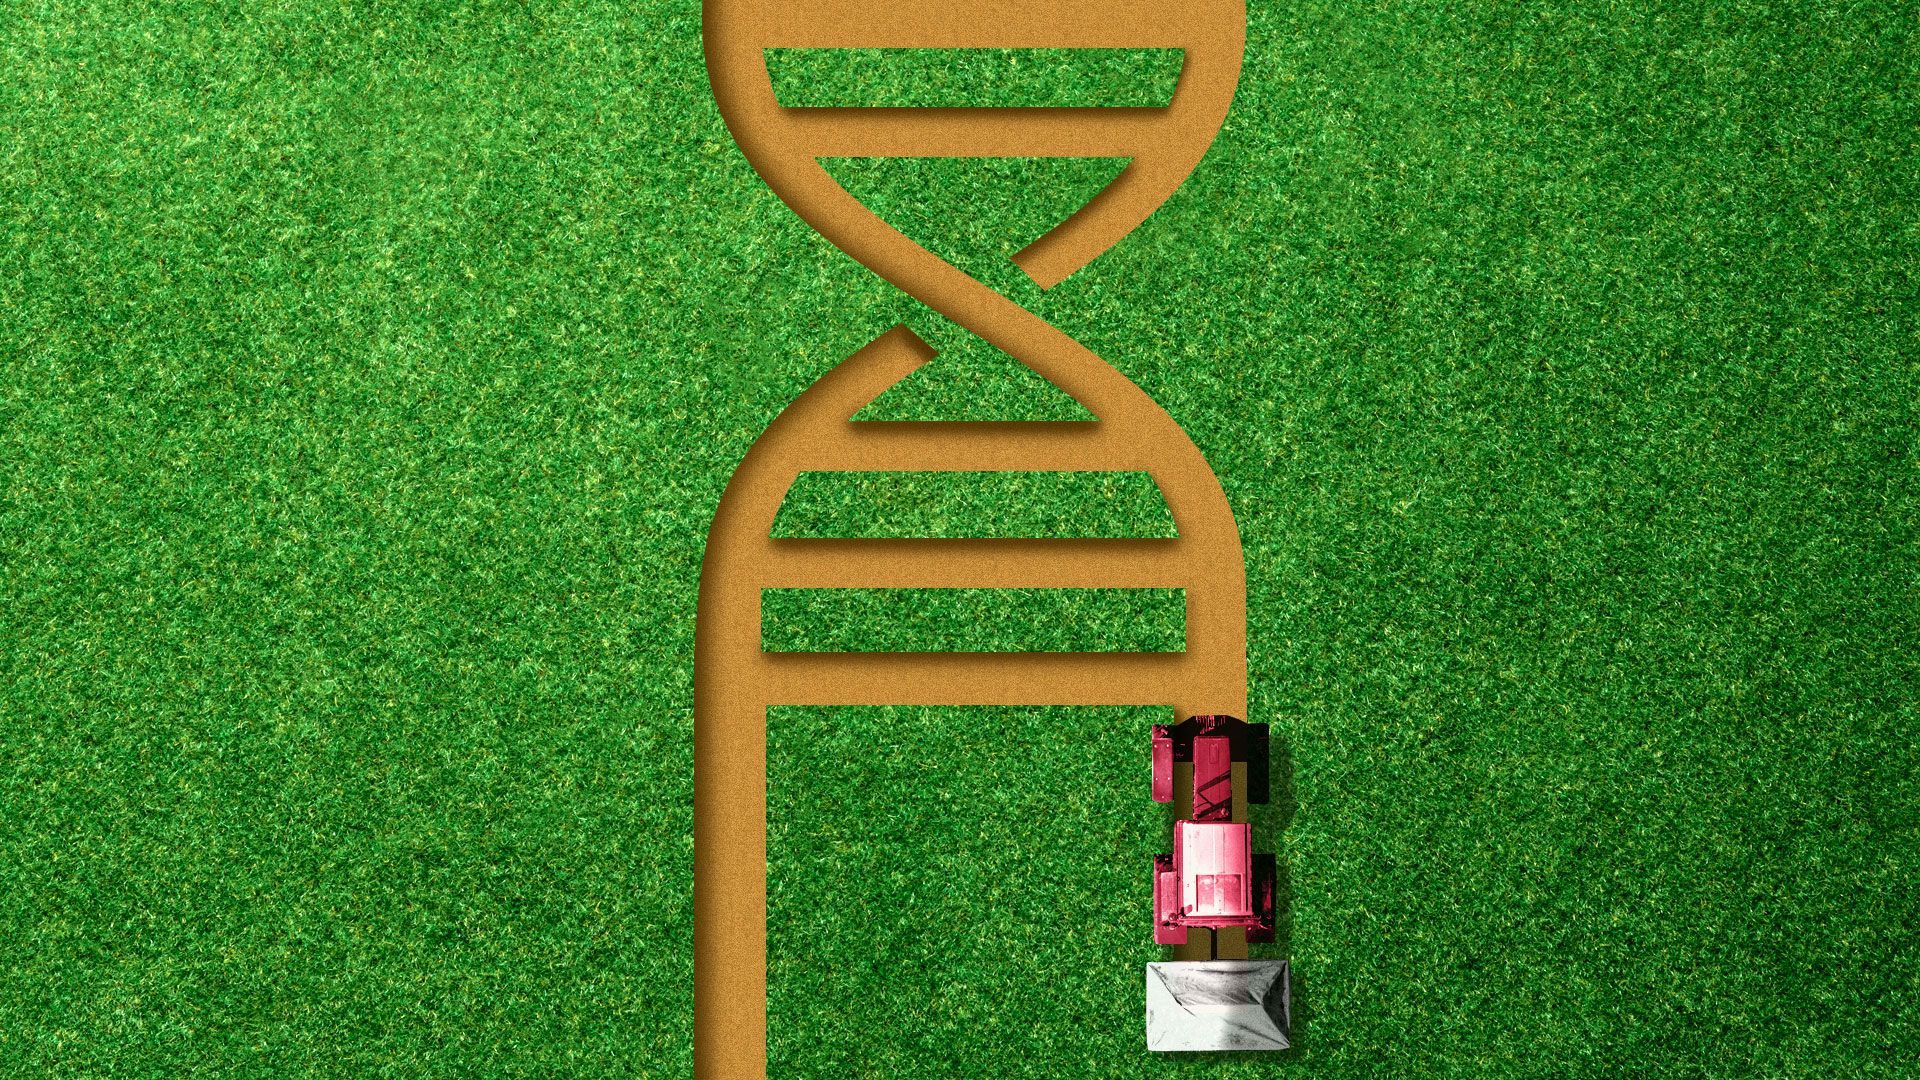 Illustration of harvester cutting a Helix DNA shape into farm land